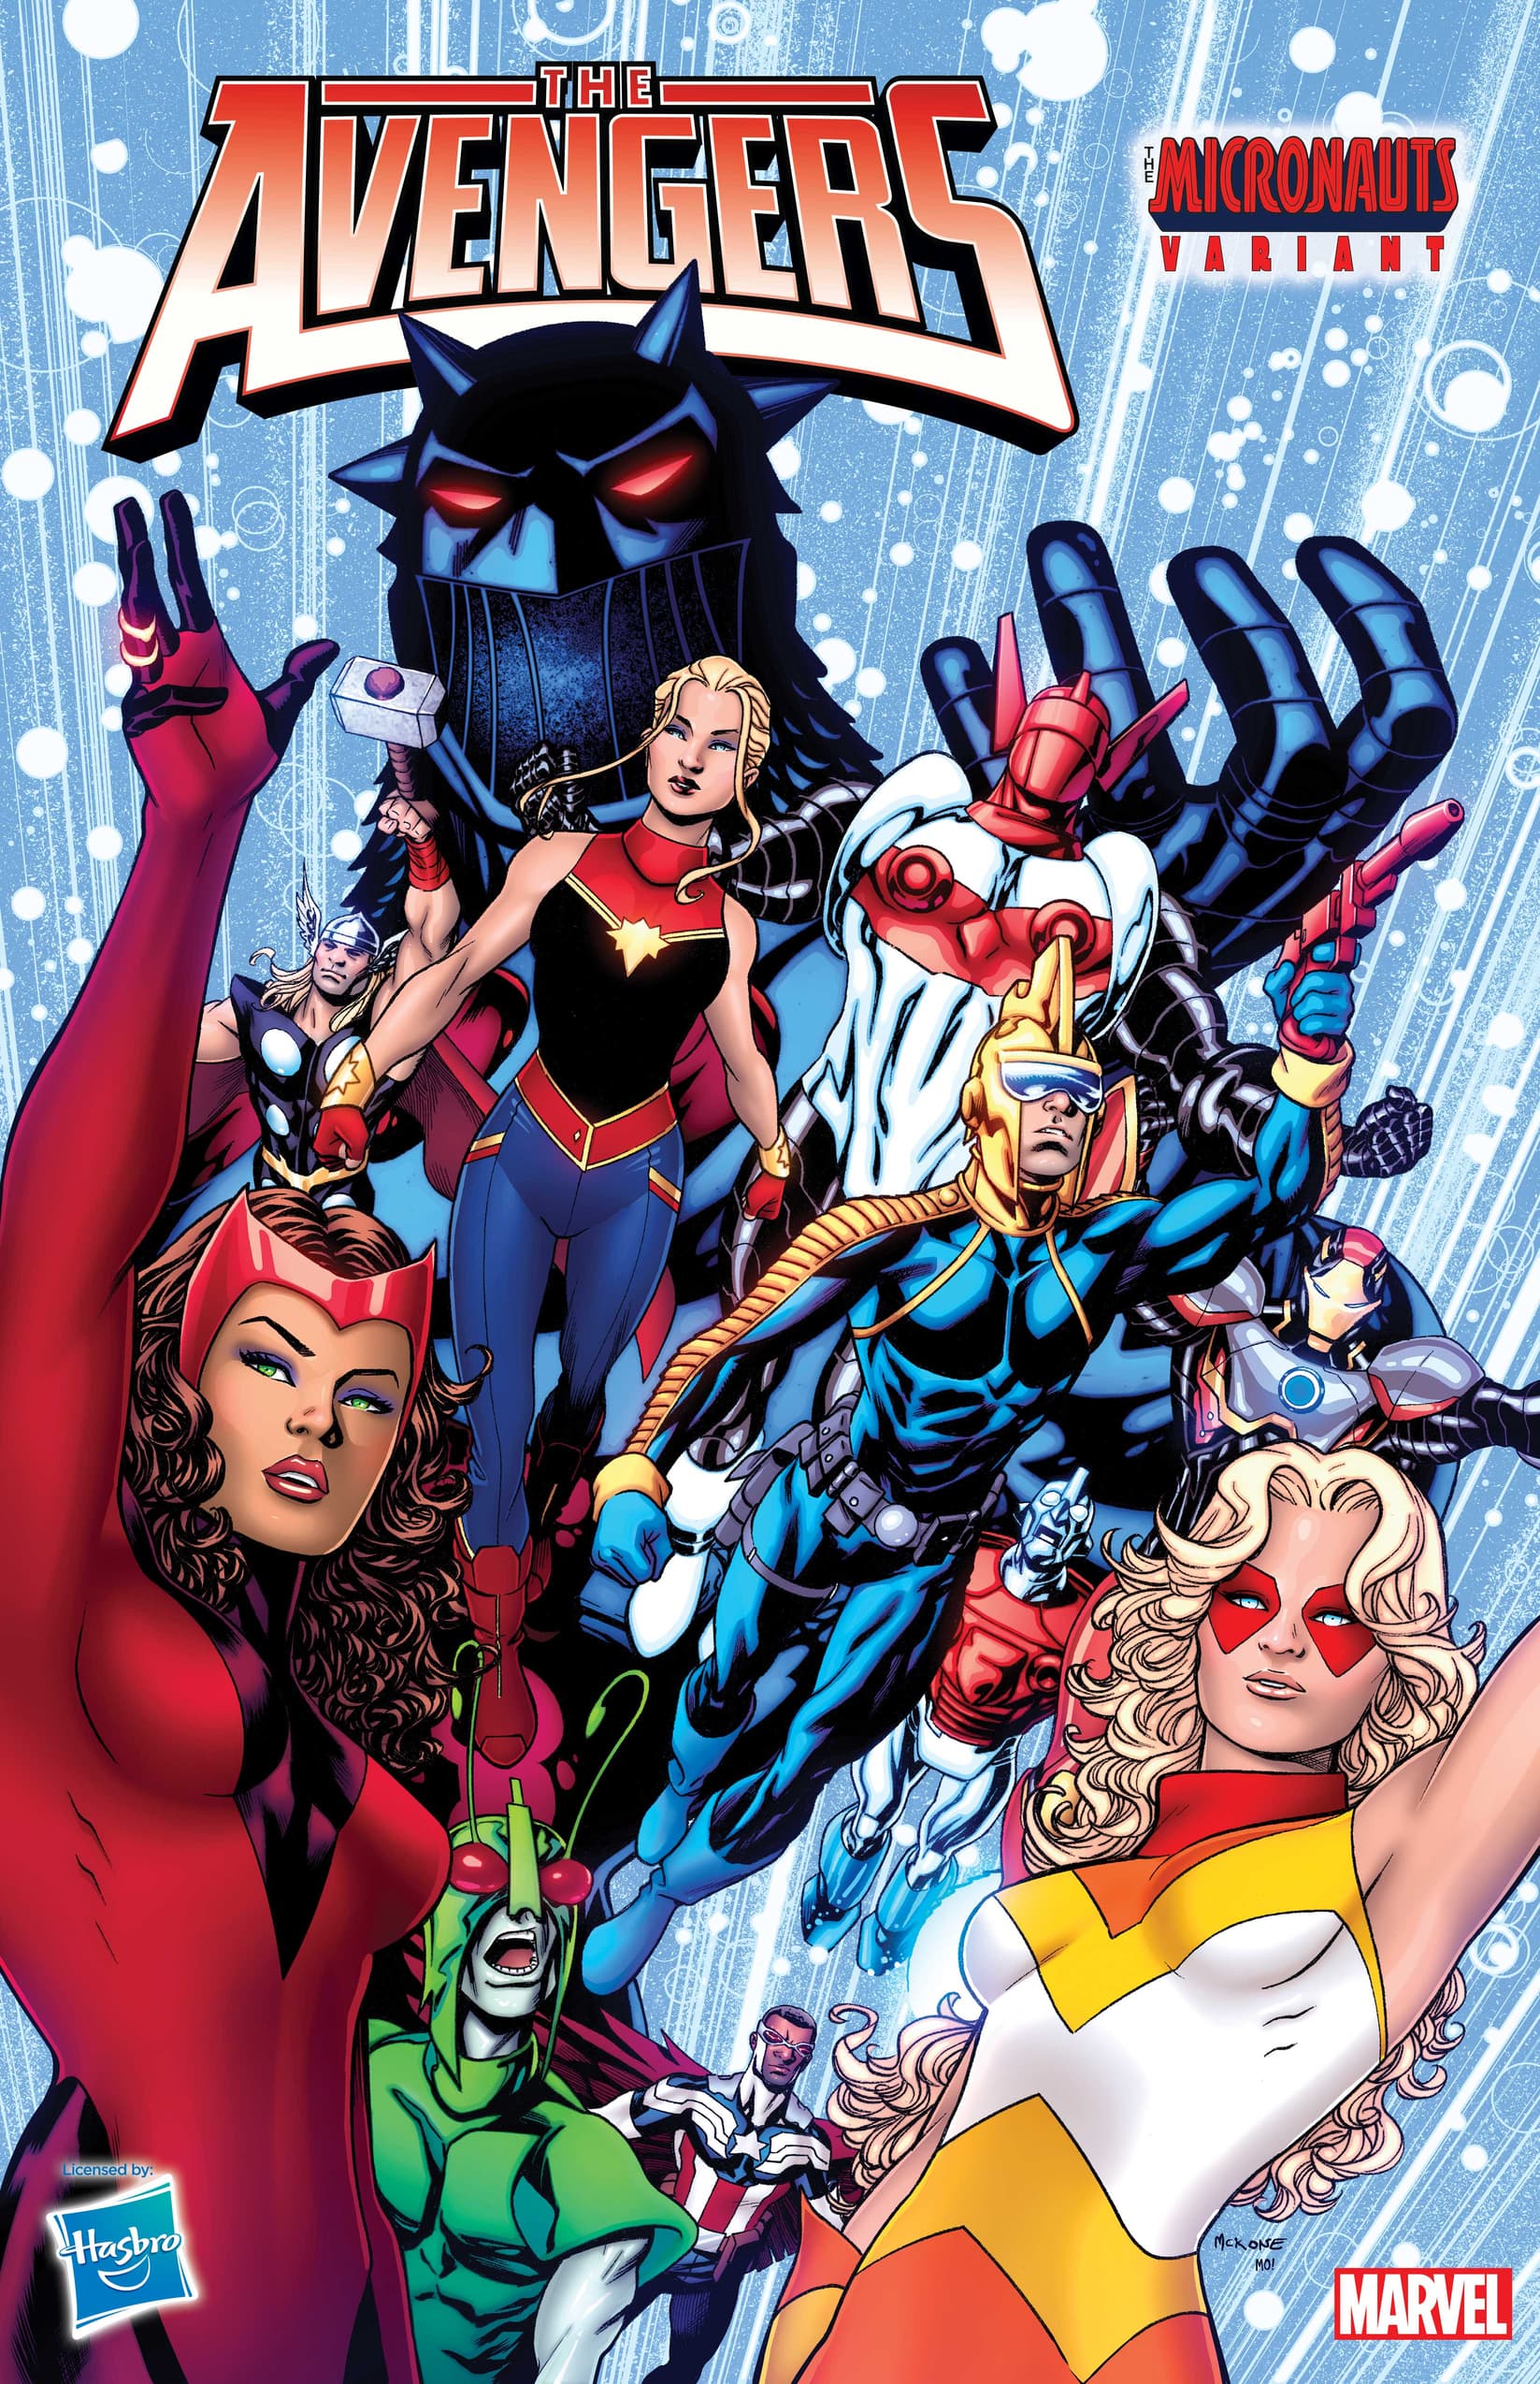 AVENGERS #13 Micronauts Variant Cover by Mike McKone